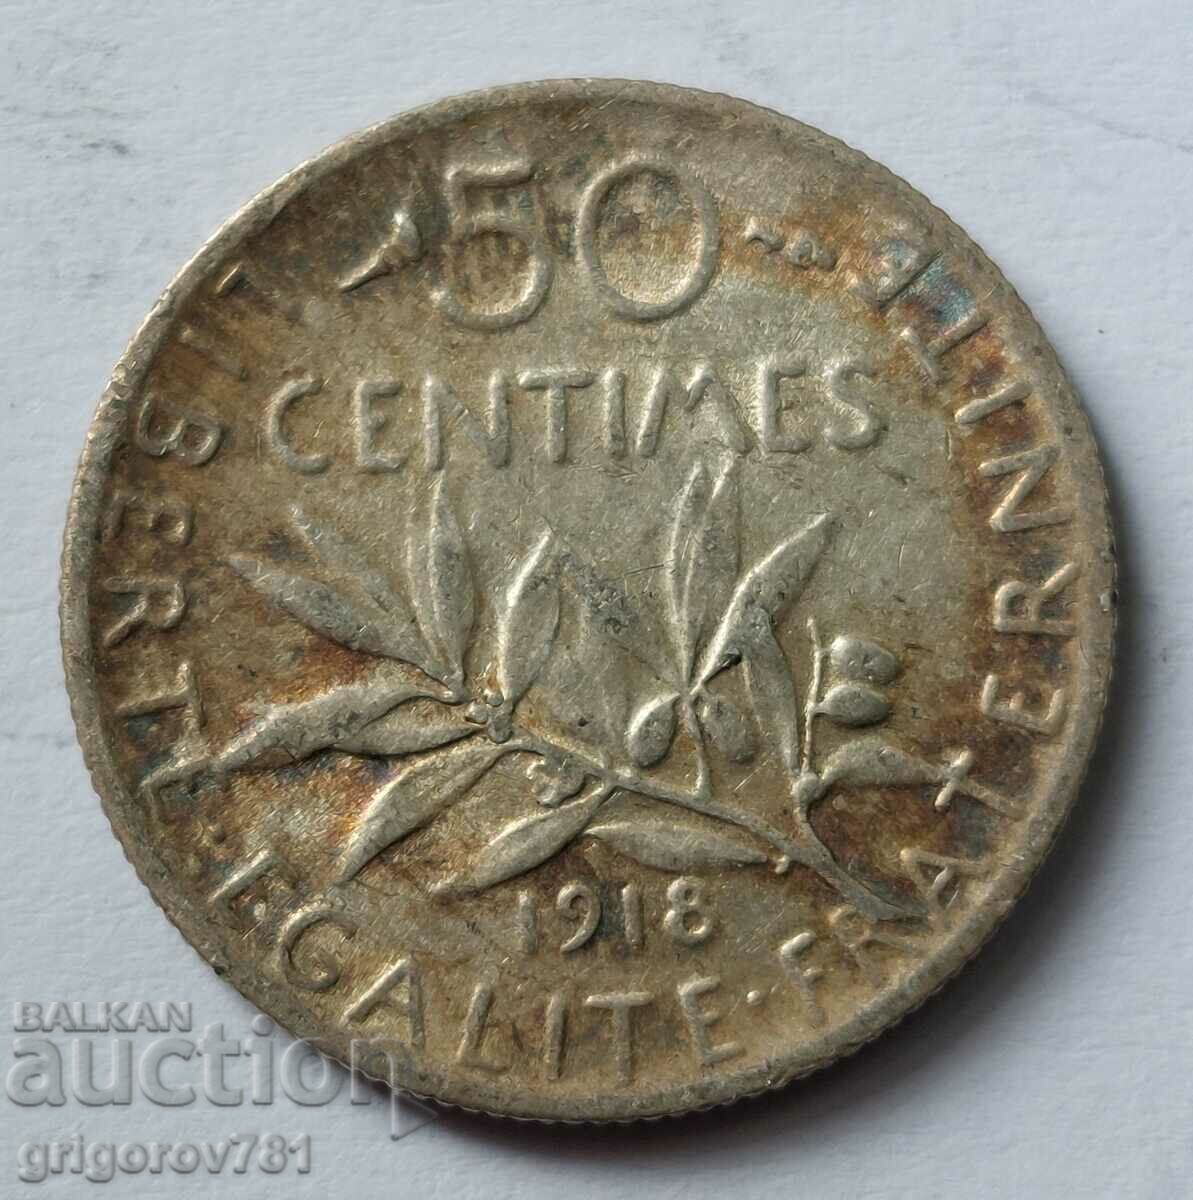 50 centimes silver France 1918 - silver coin №21